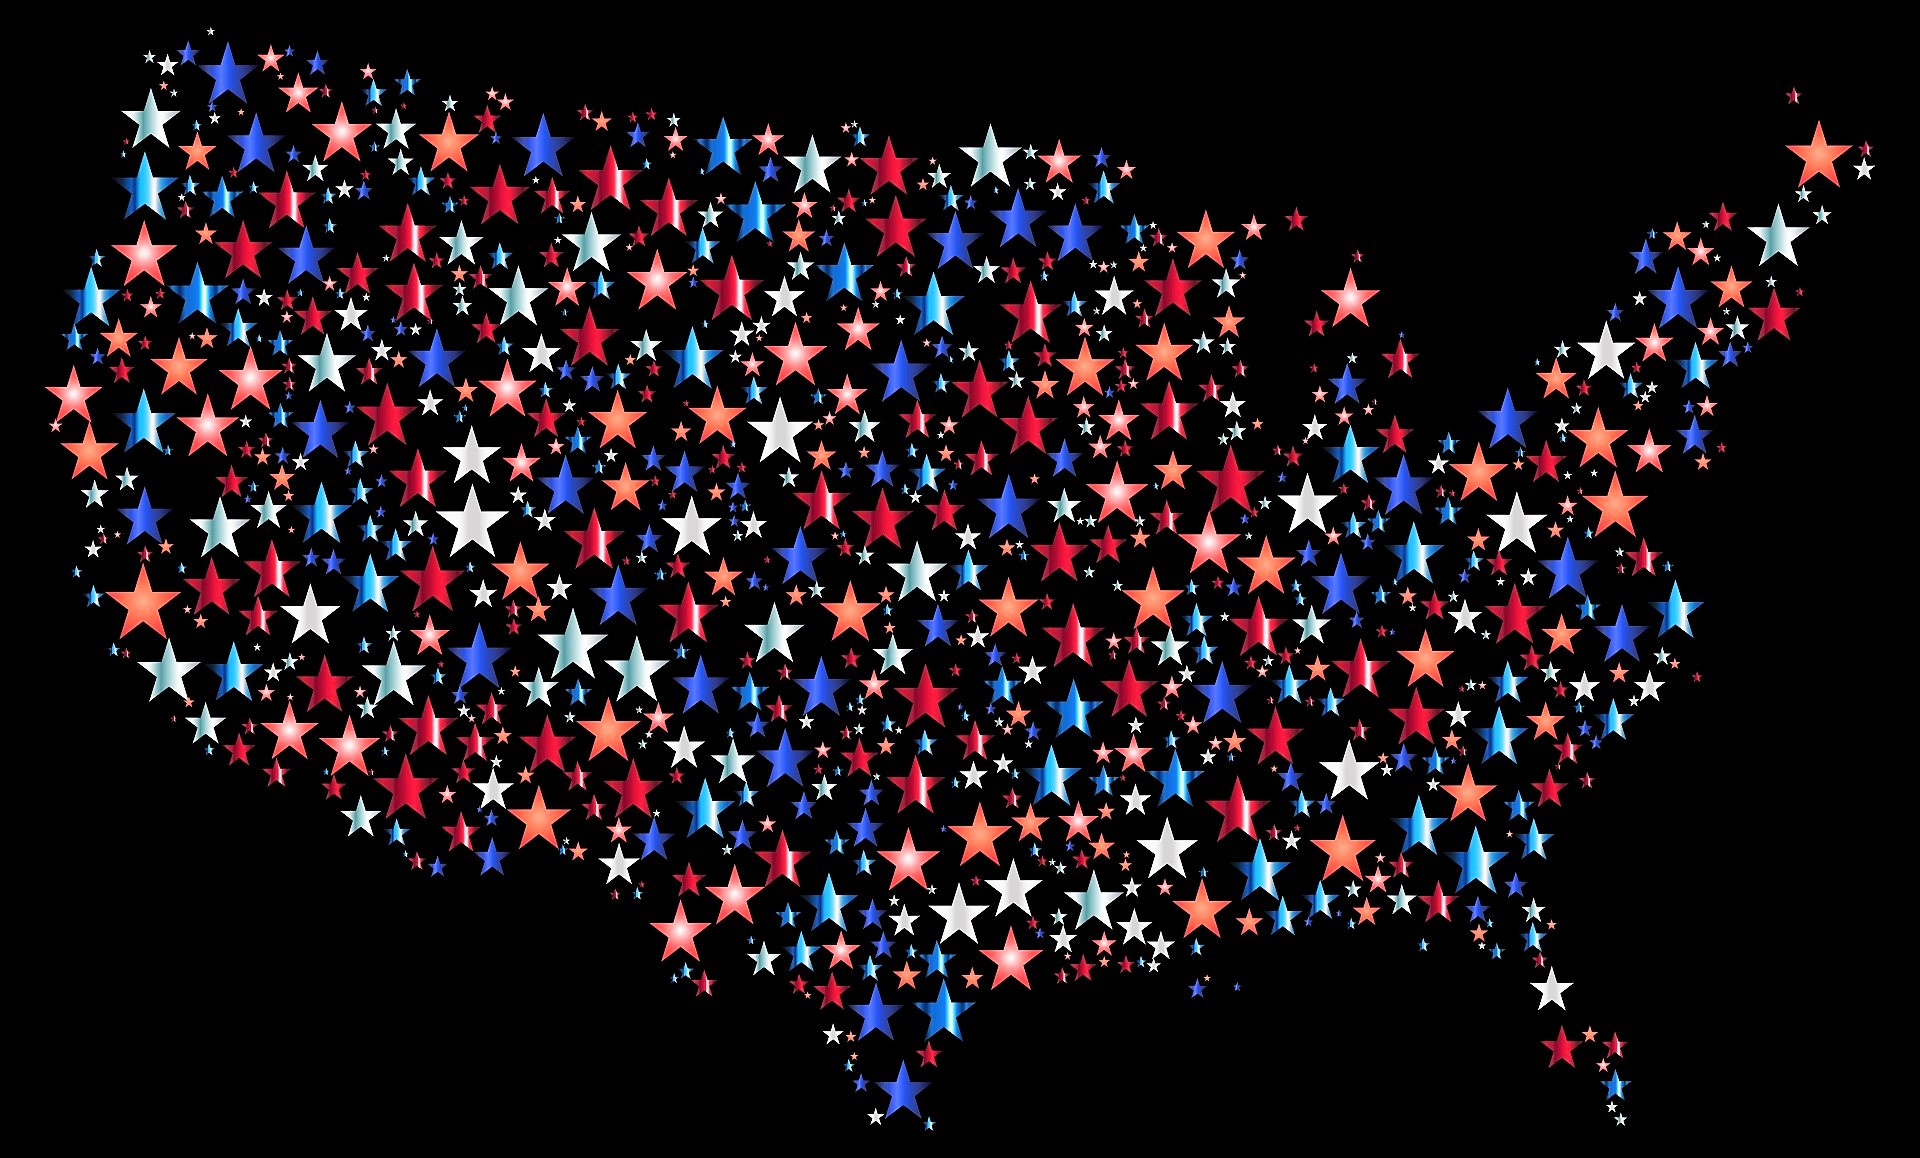 Red, White, and Blue Star Map of the United States